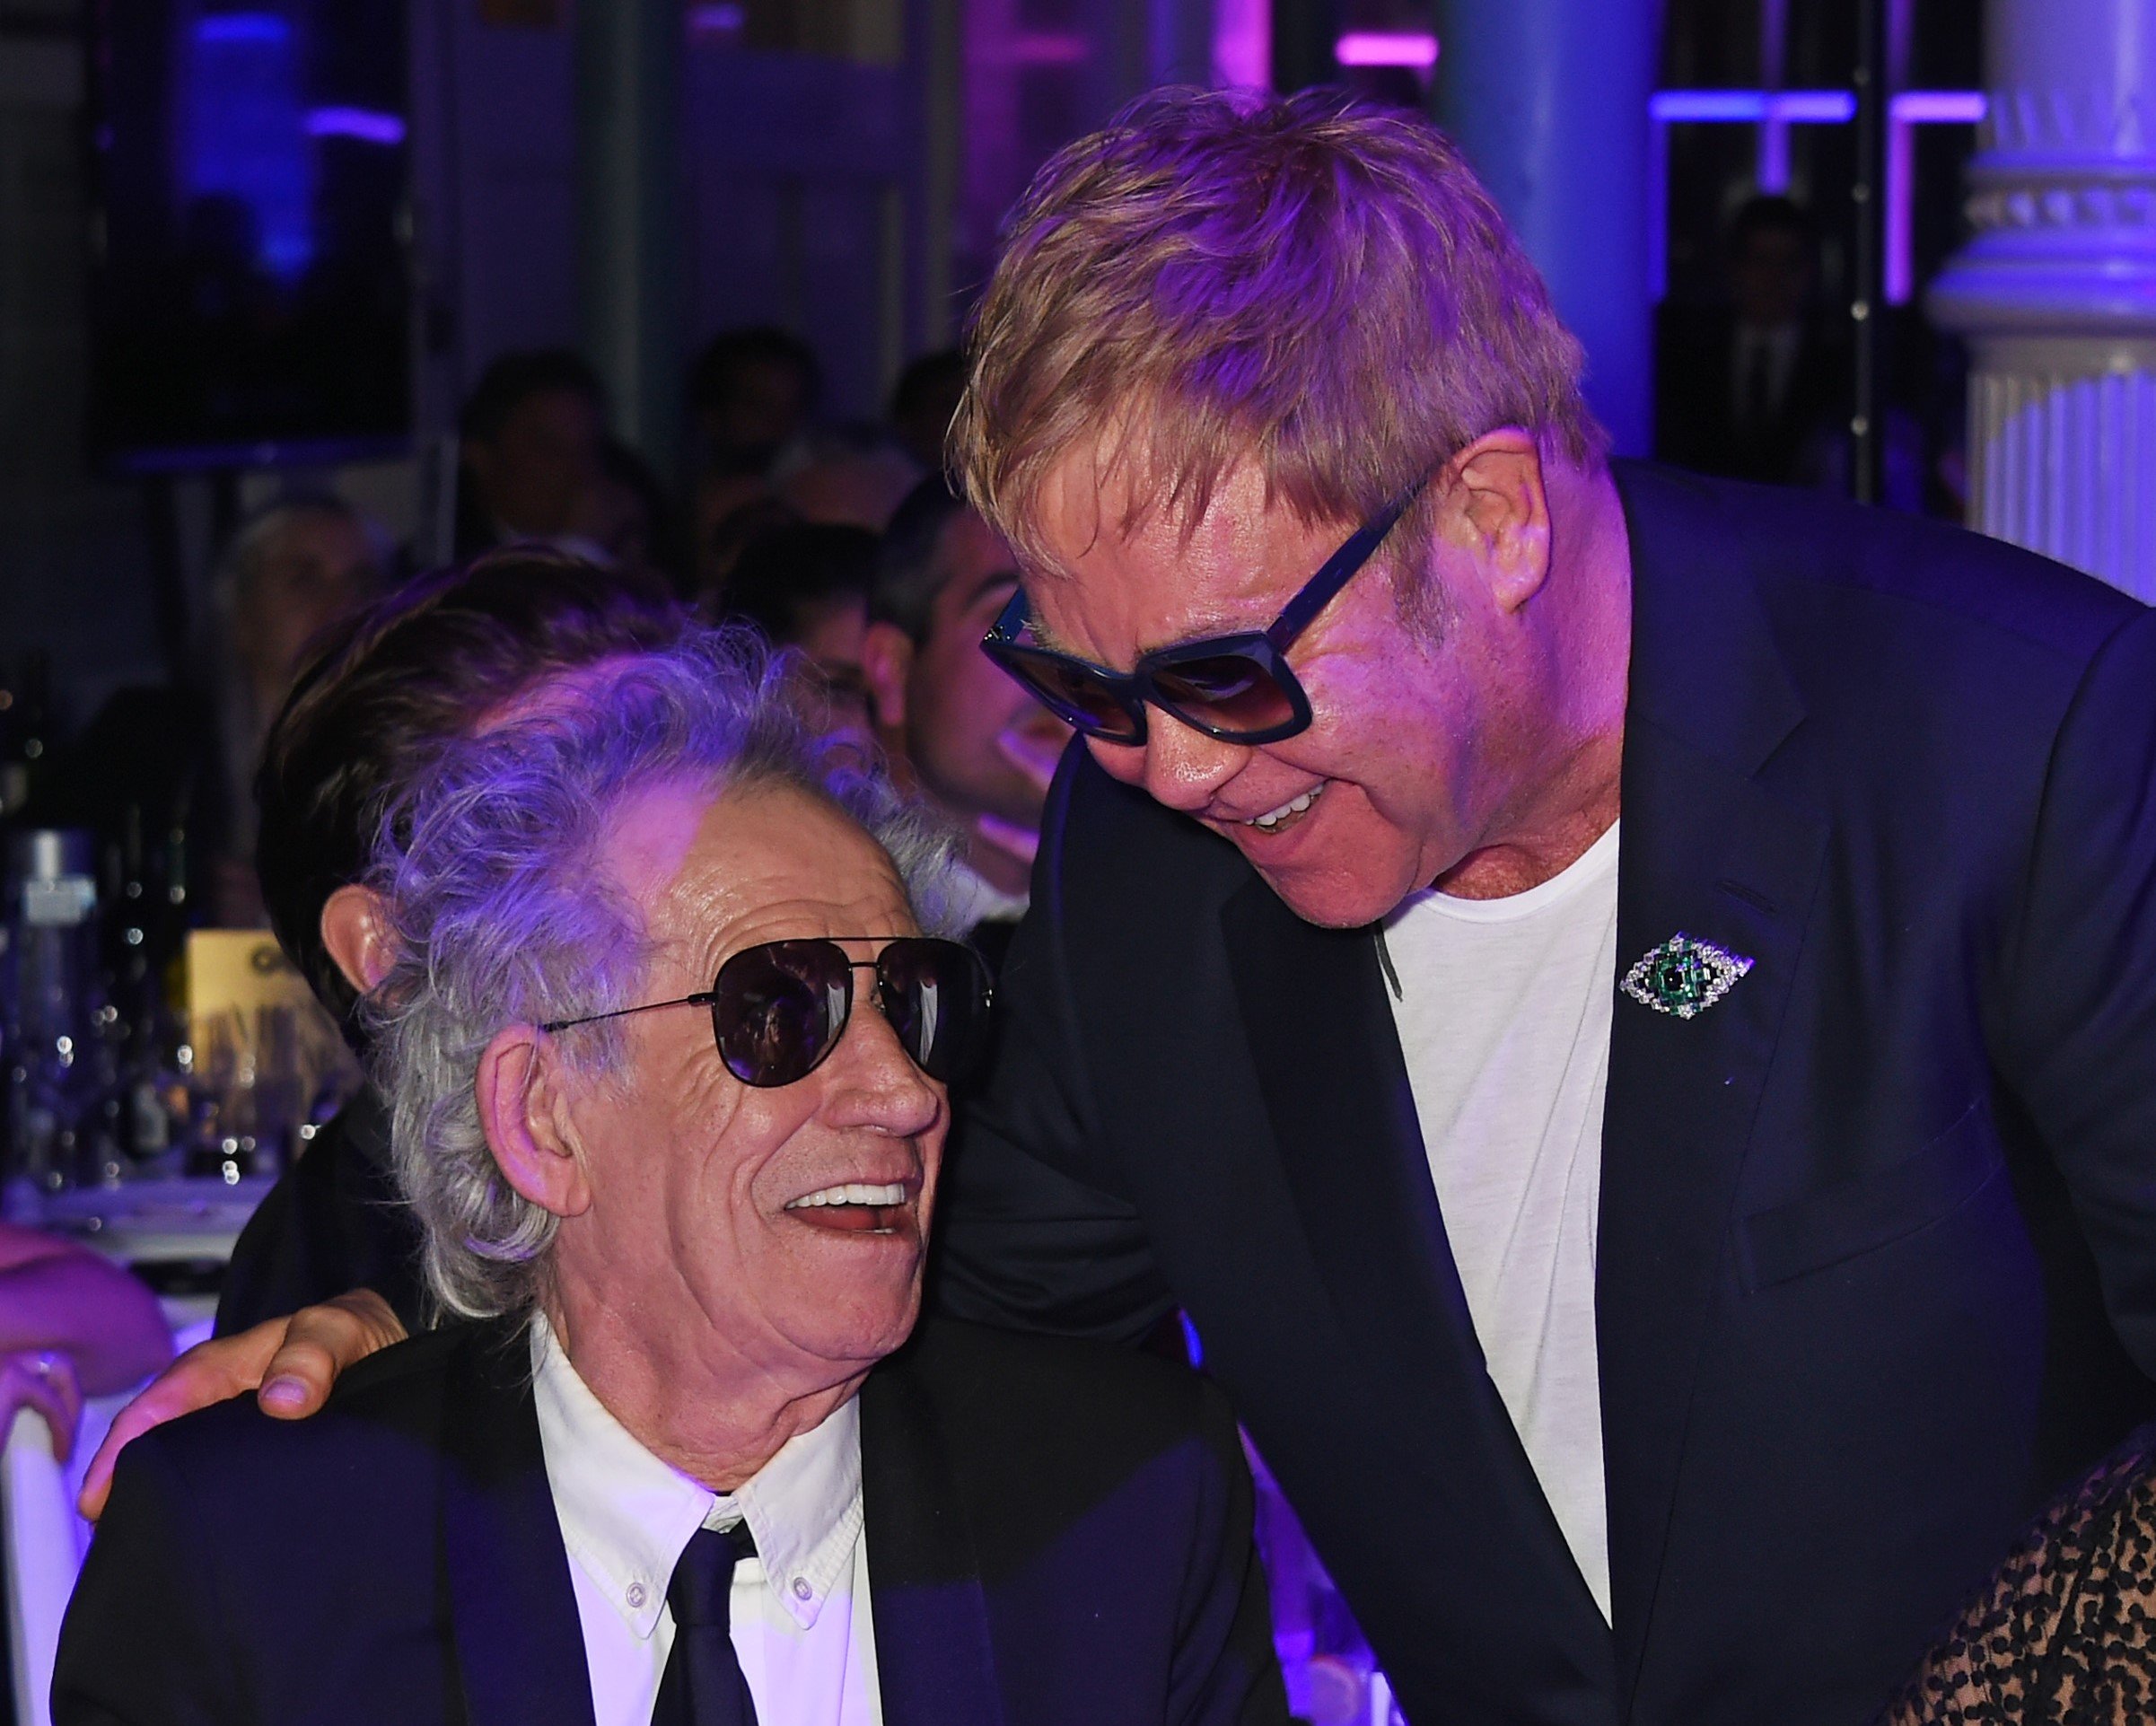 Elton John stands with his hand on Keith Richards' shoulder. They both wear sunglasses.